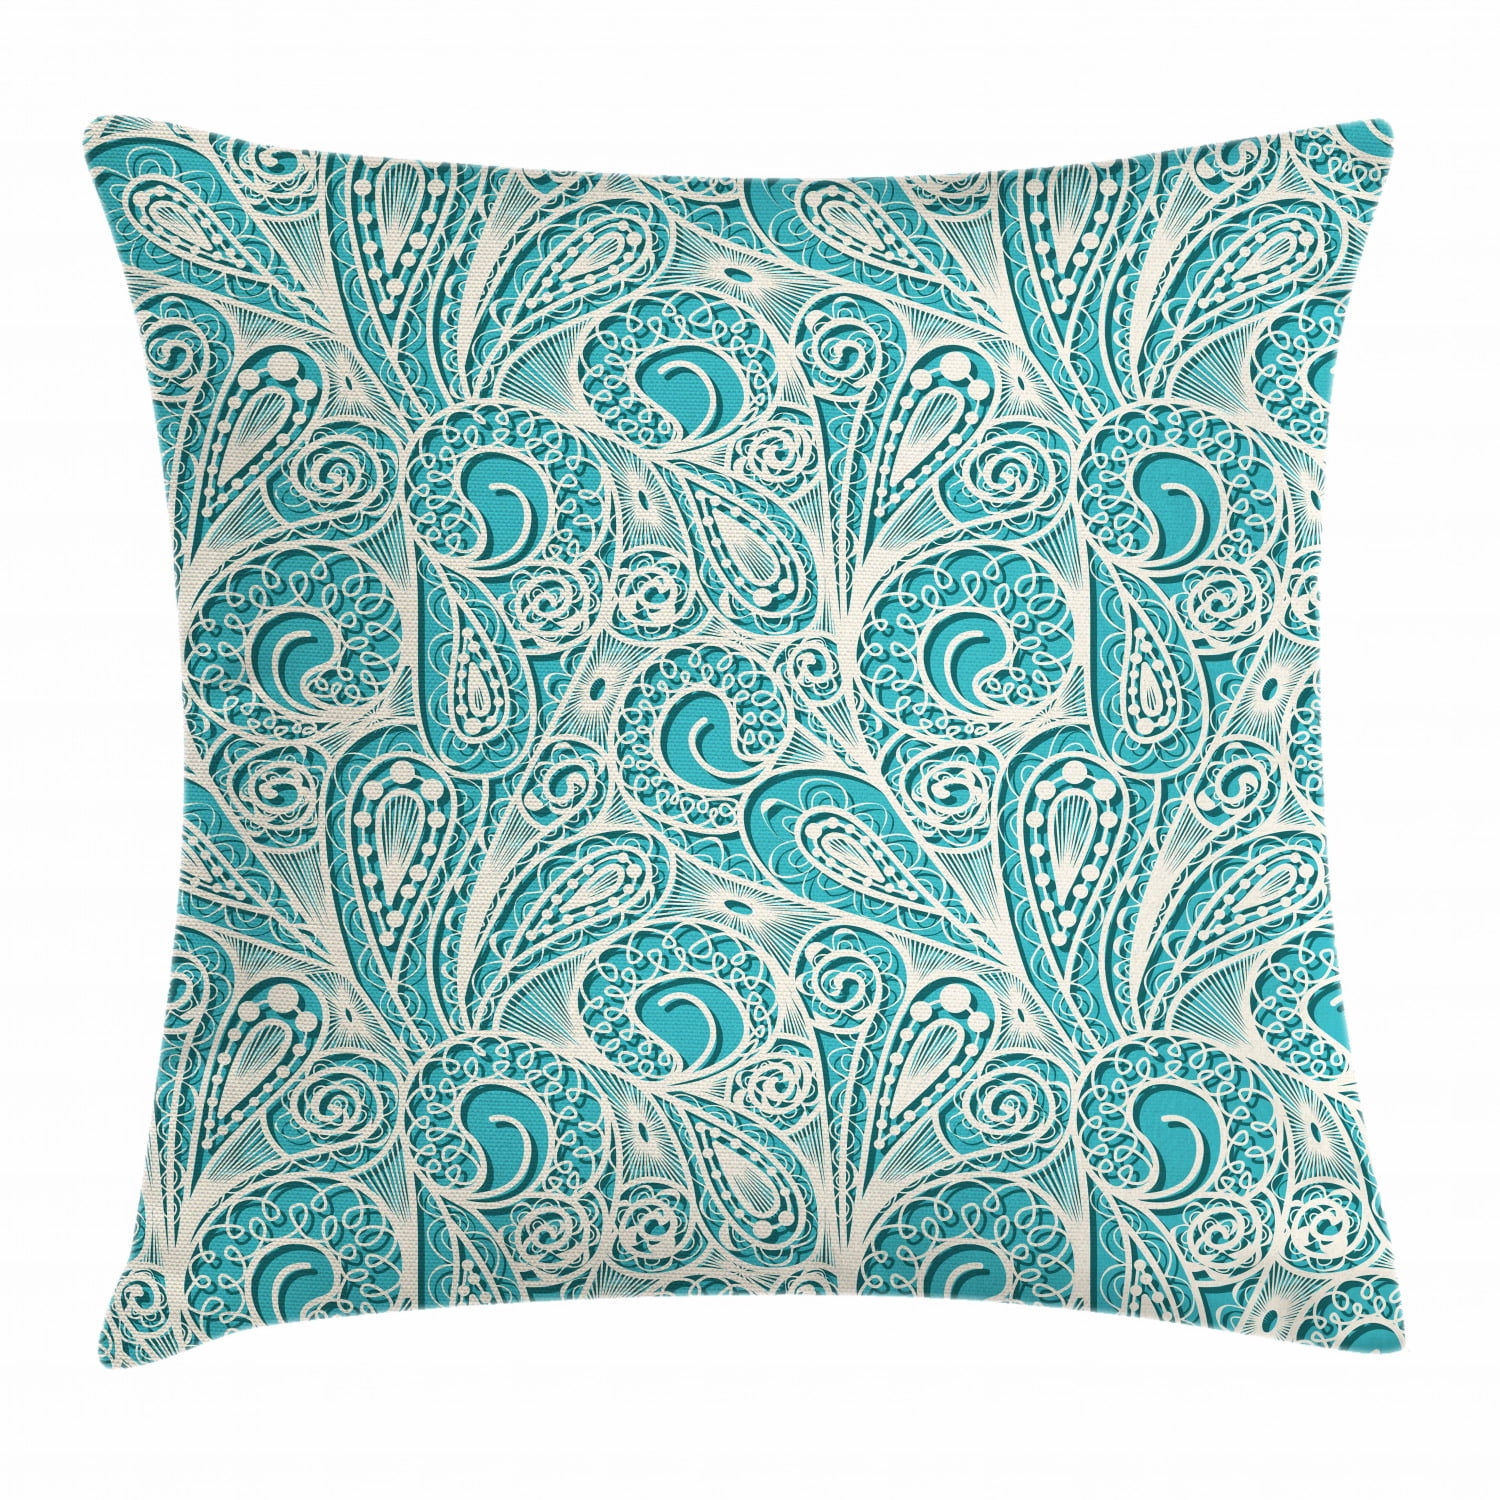 Teal and White Throw Pillow Cushion Cover, White Lace Style Pattern ...